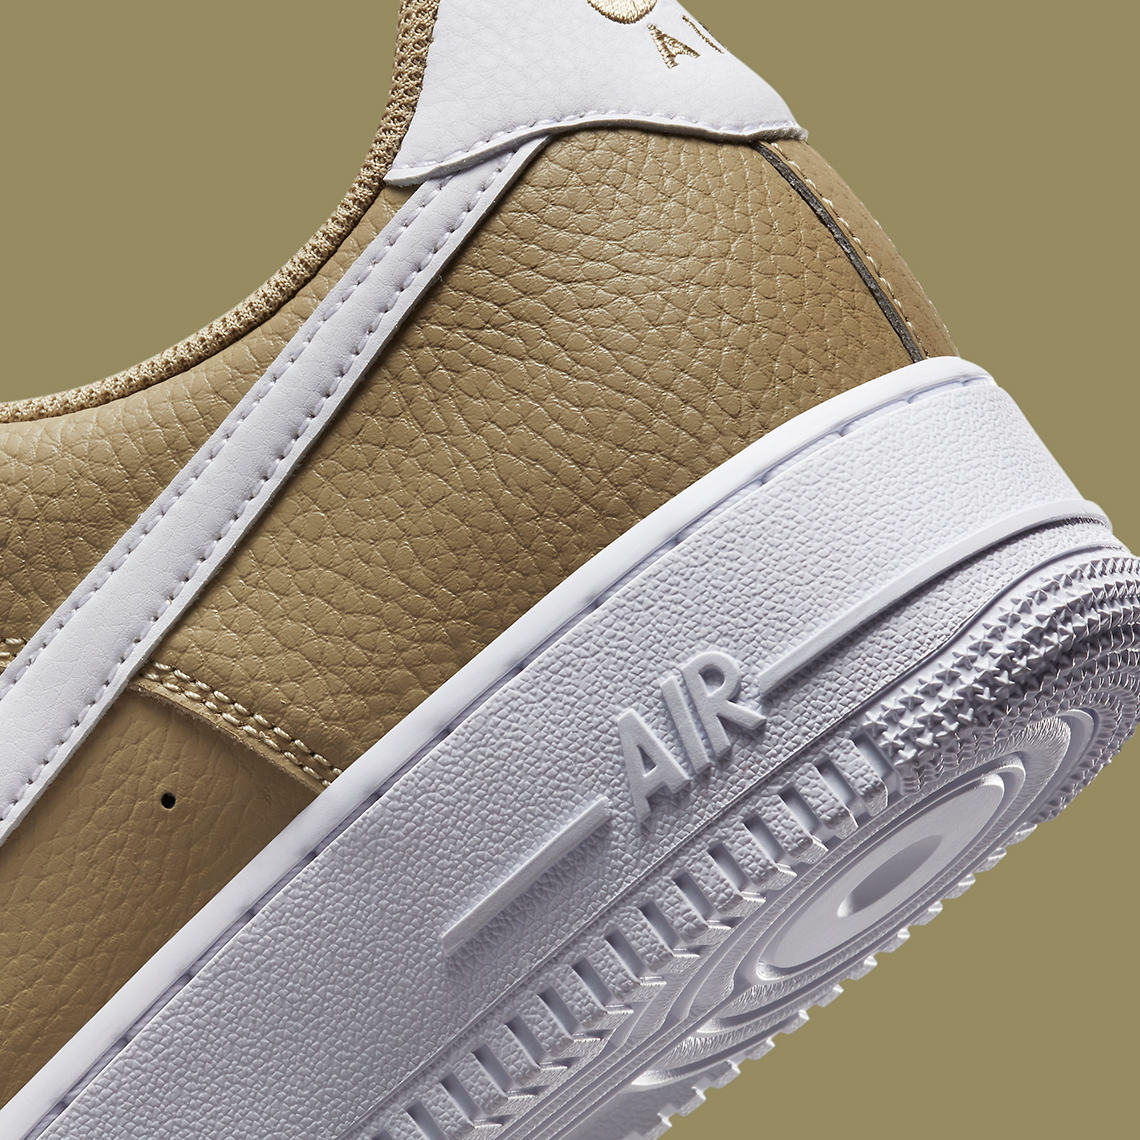 Nike airforce 1 low 07 double swoosh olive/green